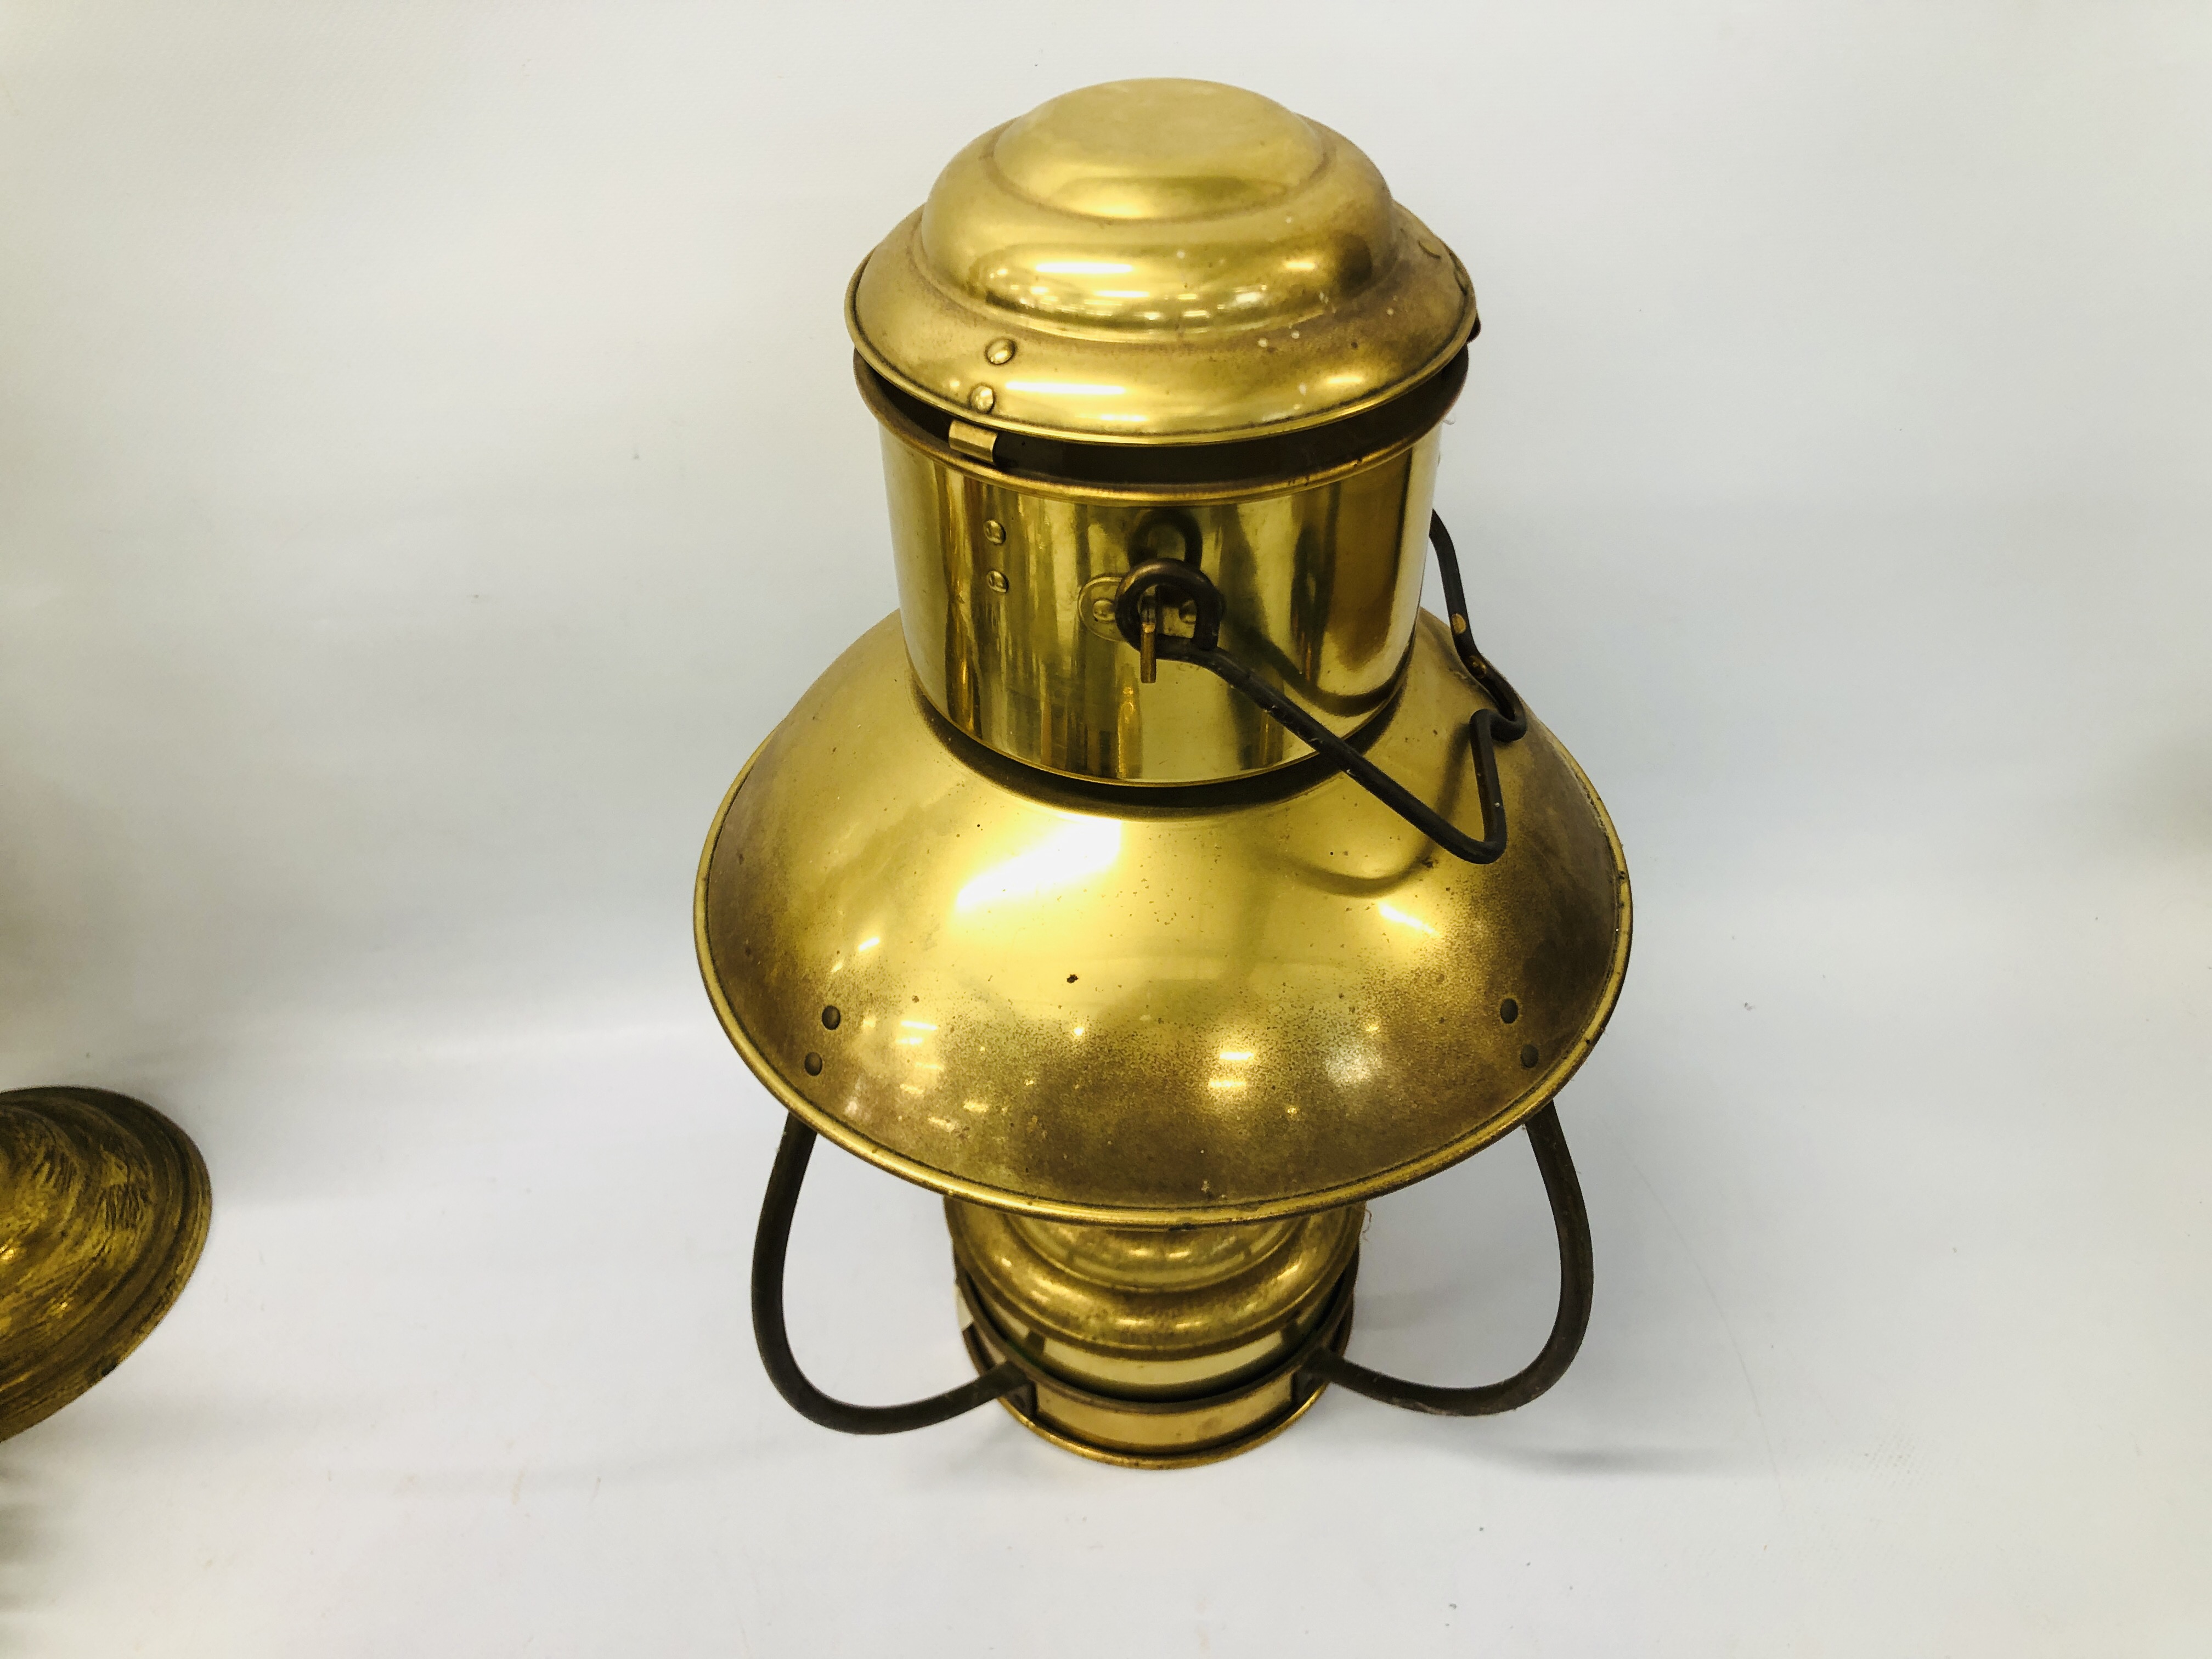 MIXED BRASS AND COPPER TO INCLUDE OIL LAMPS, LAMPS, STOVE, TRIVET, WATERING CAN, SCALES, CUPS, - Image 11 of 27